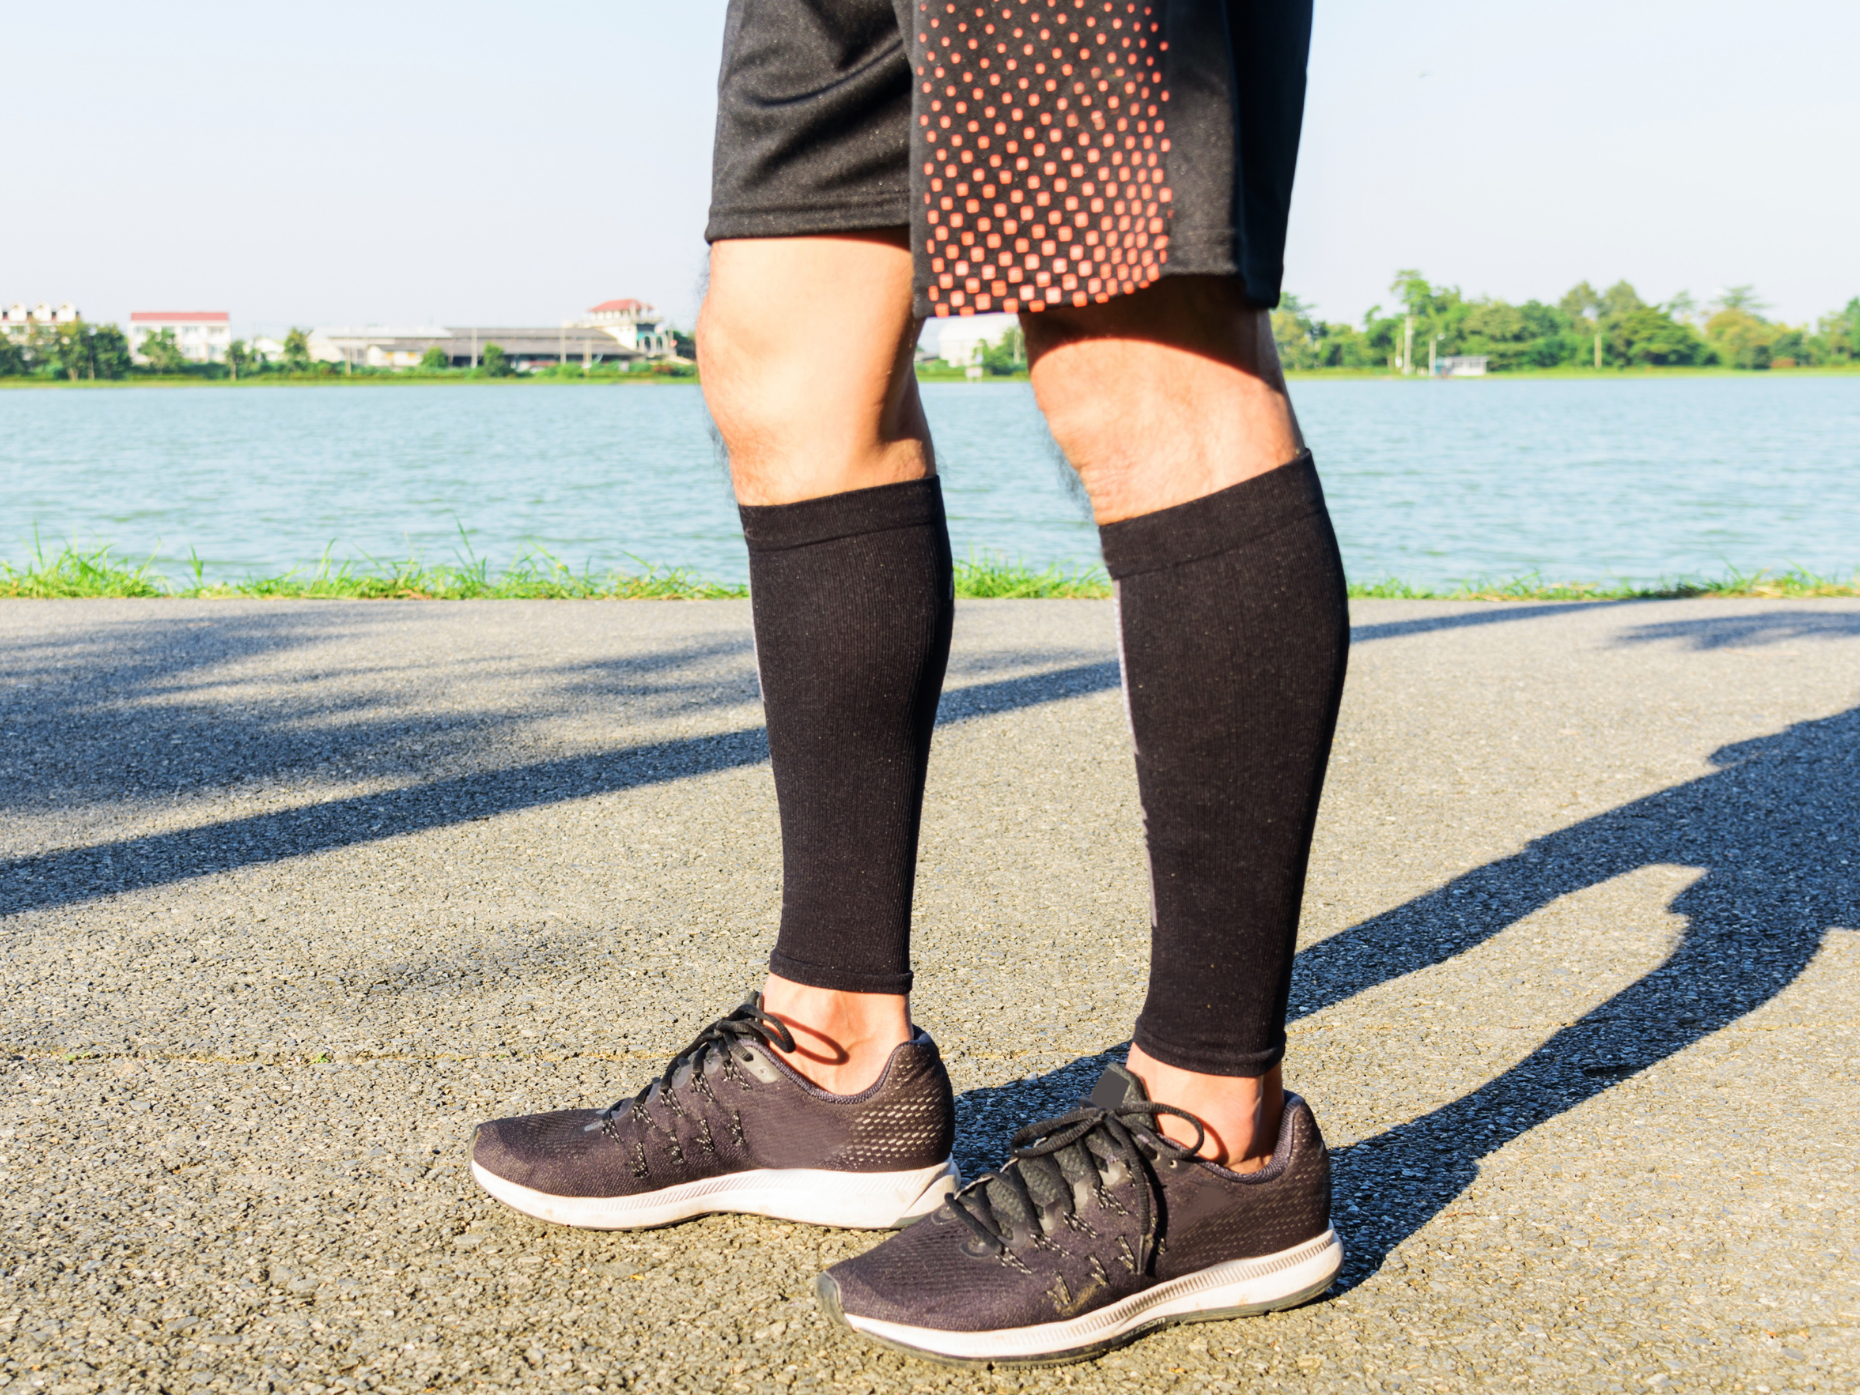 Best Calf Compression Sleeves: Boost Performance and Reduce